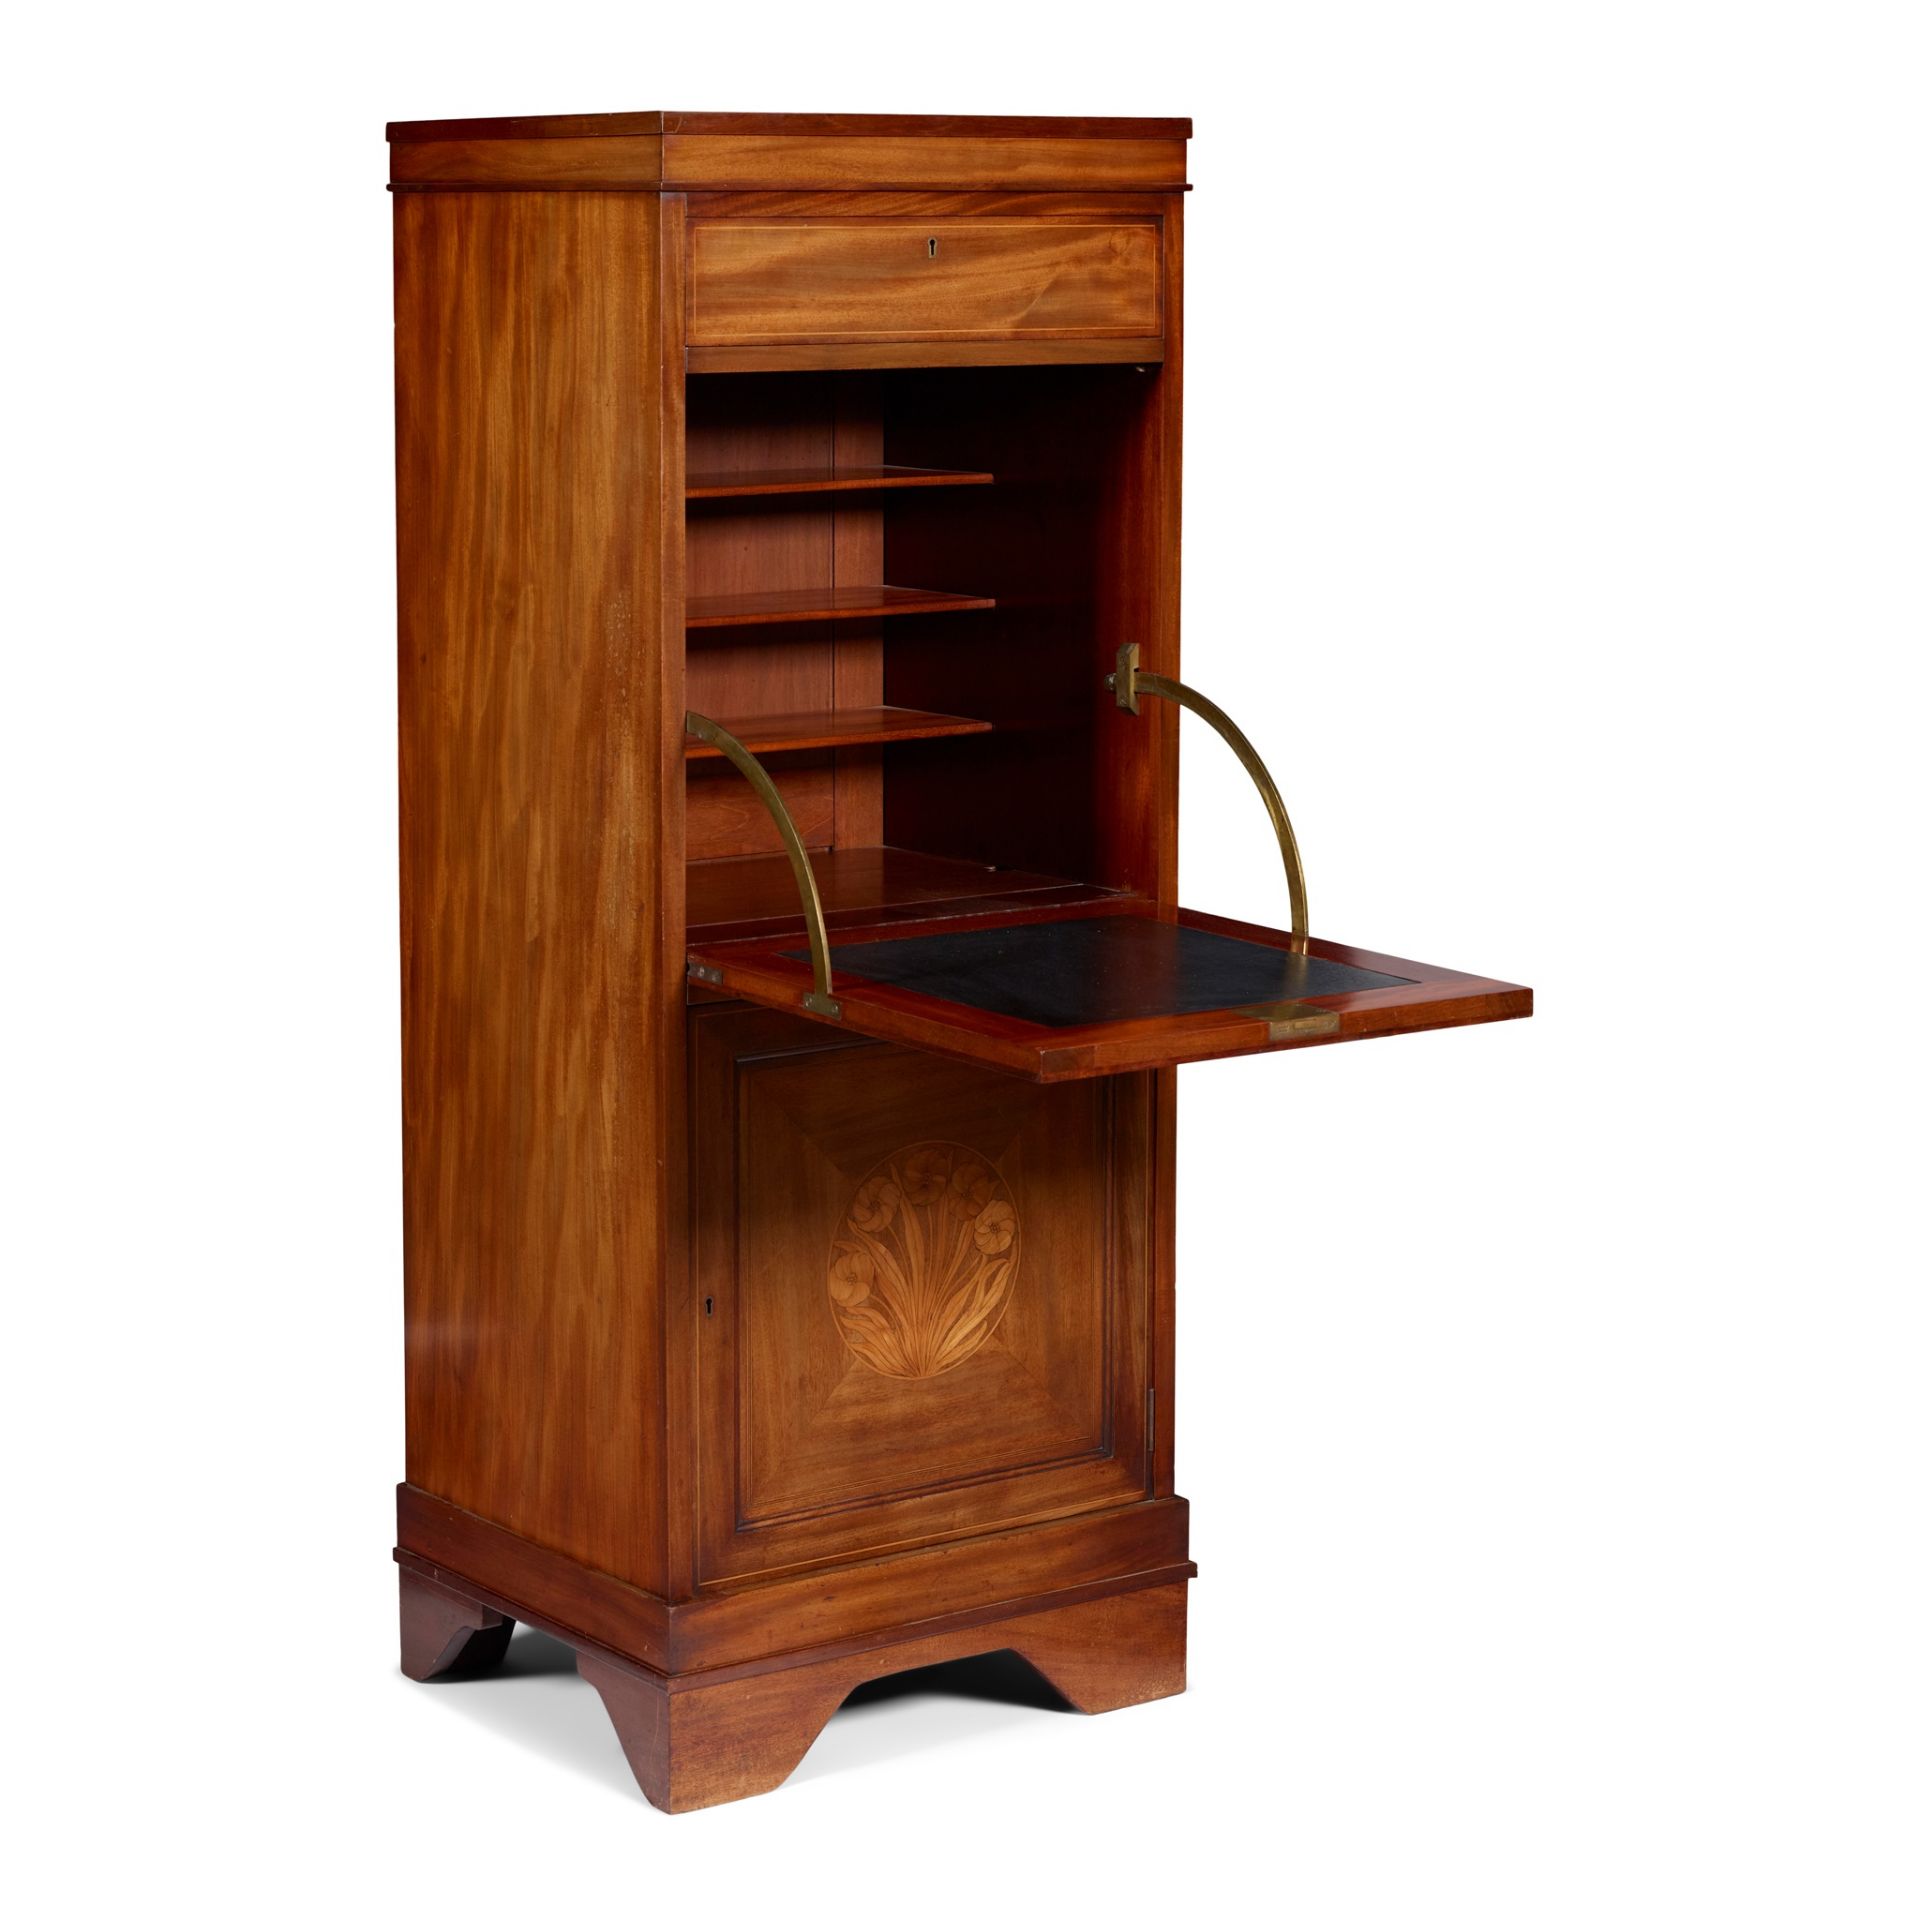 ARTHUR HEYGATE MACKMURDO (1851-1942) AND SELWYN IMAGE (1849-1930) FOR THE CENTURY GUILD SECRETAIRE - Image 3 of 7